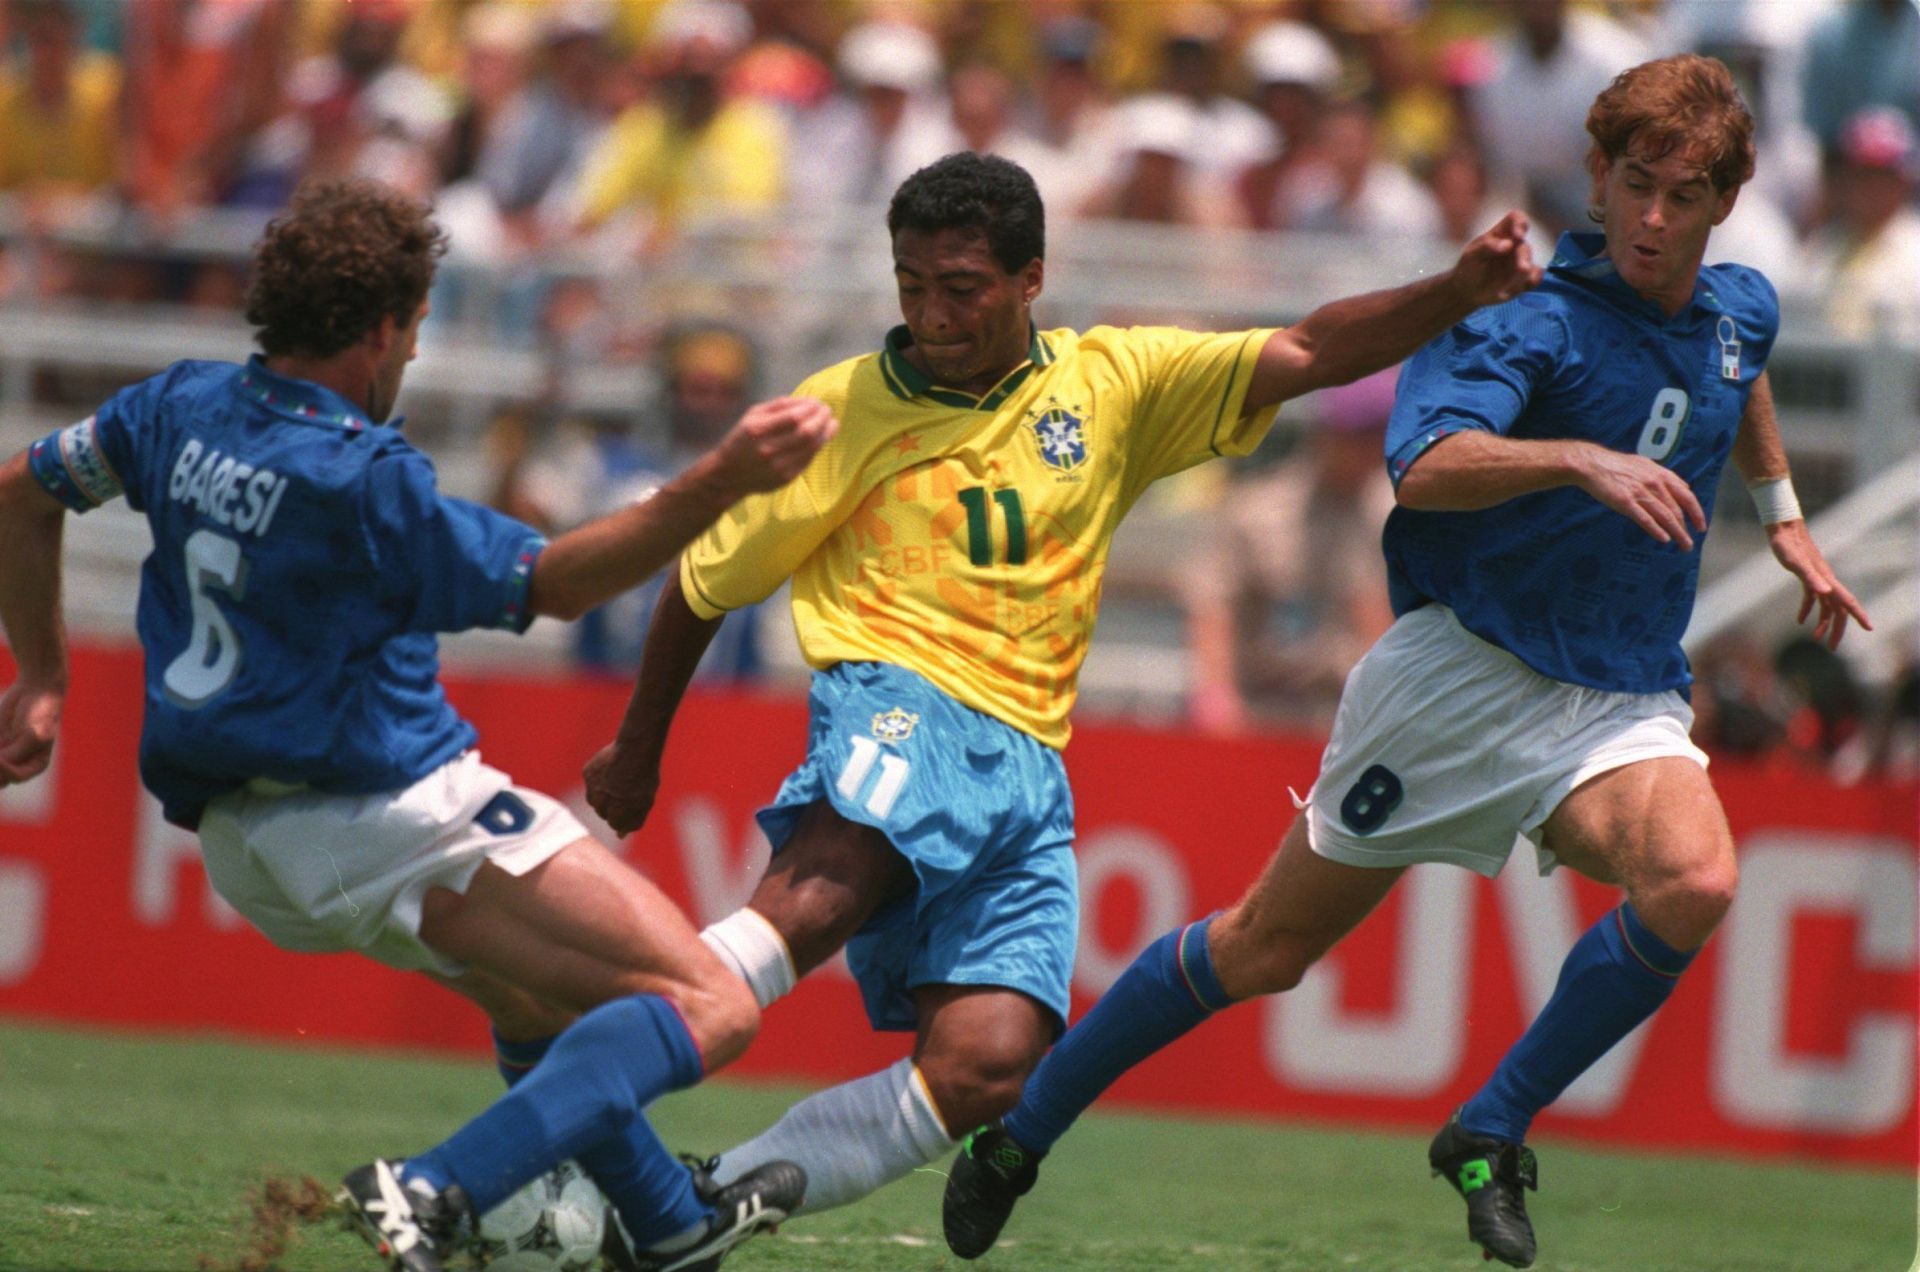 Romario in action in the 1994 World Cup Final